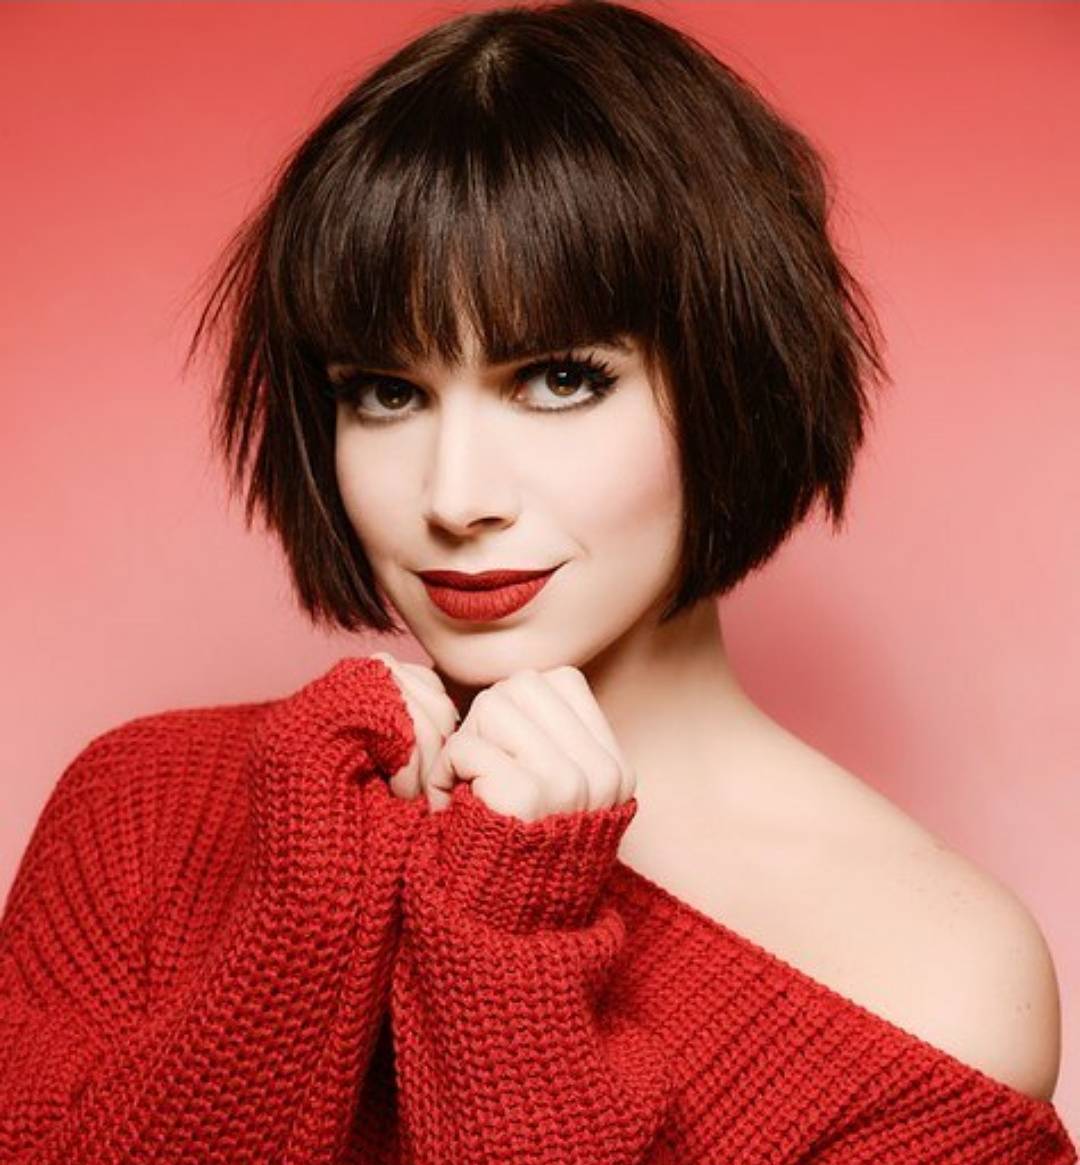 35 Most Beautiful Women’s Hairstyle With Short Hair Haircuts